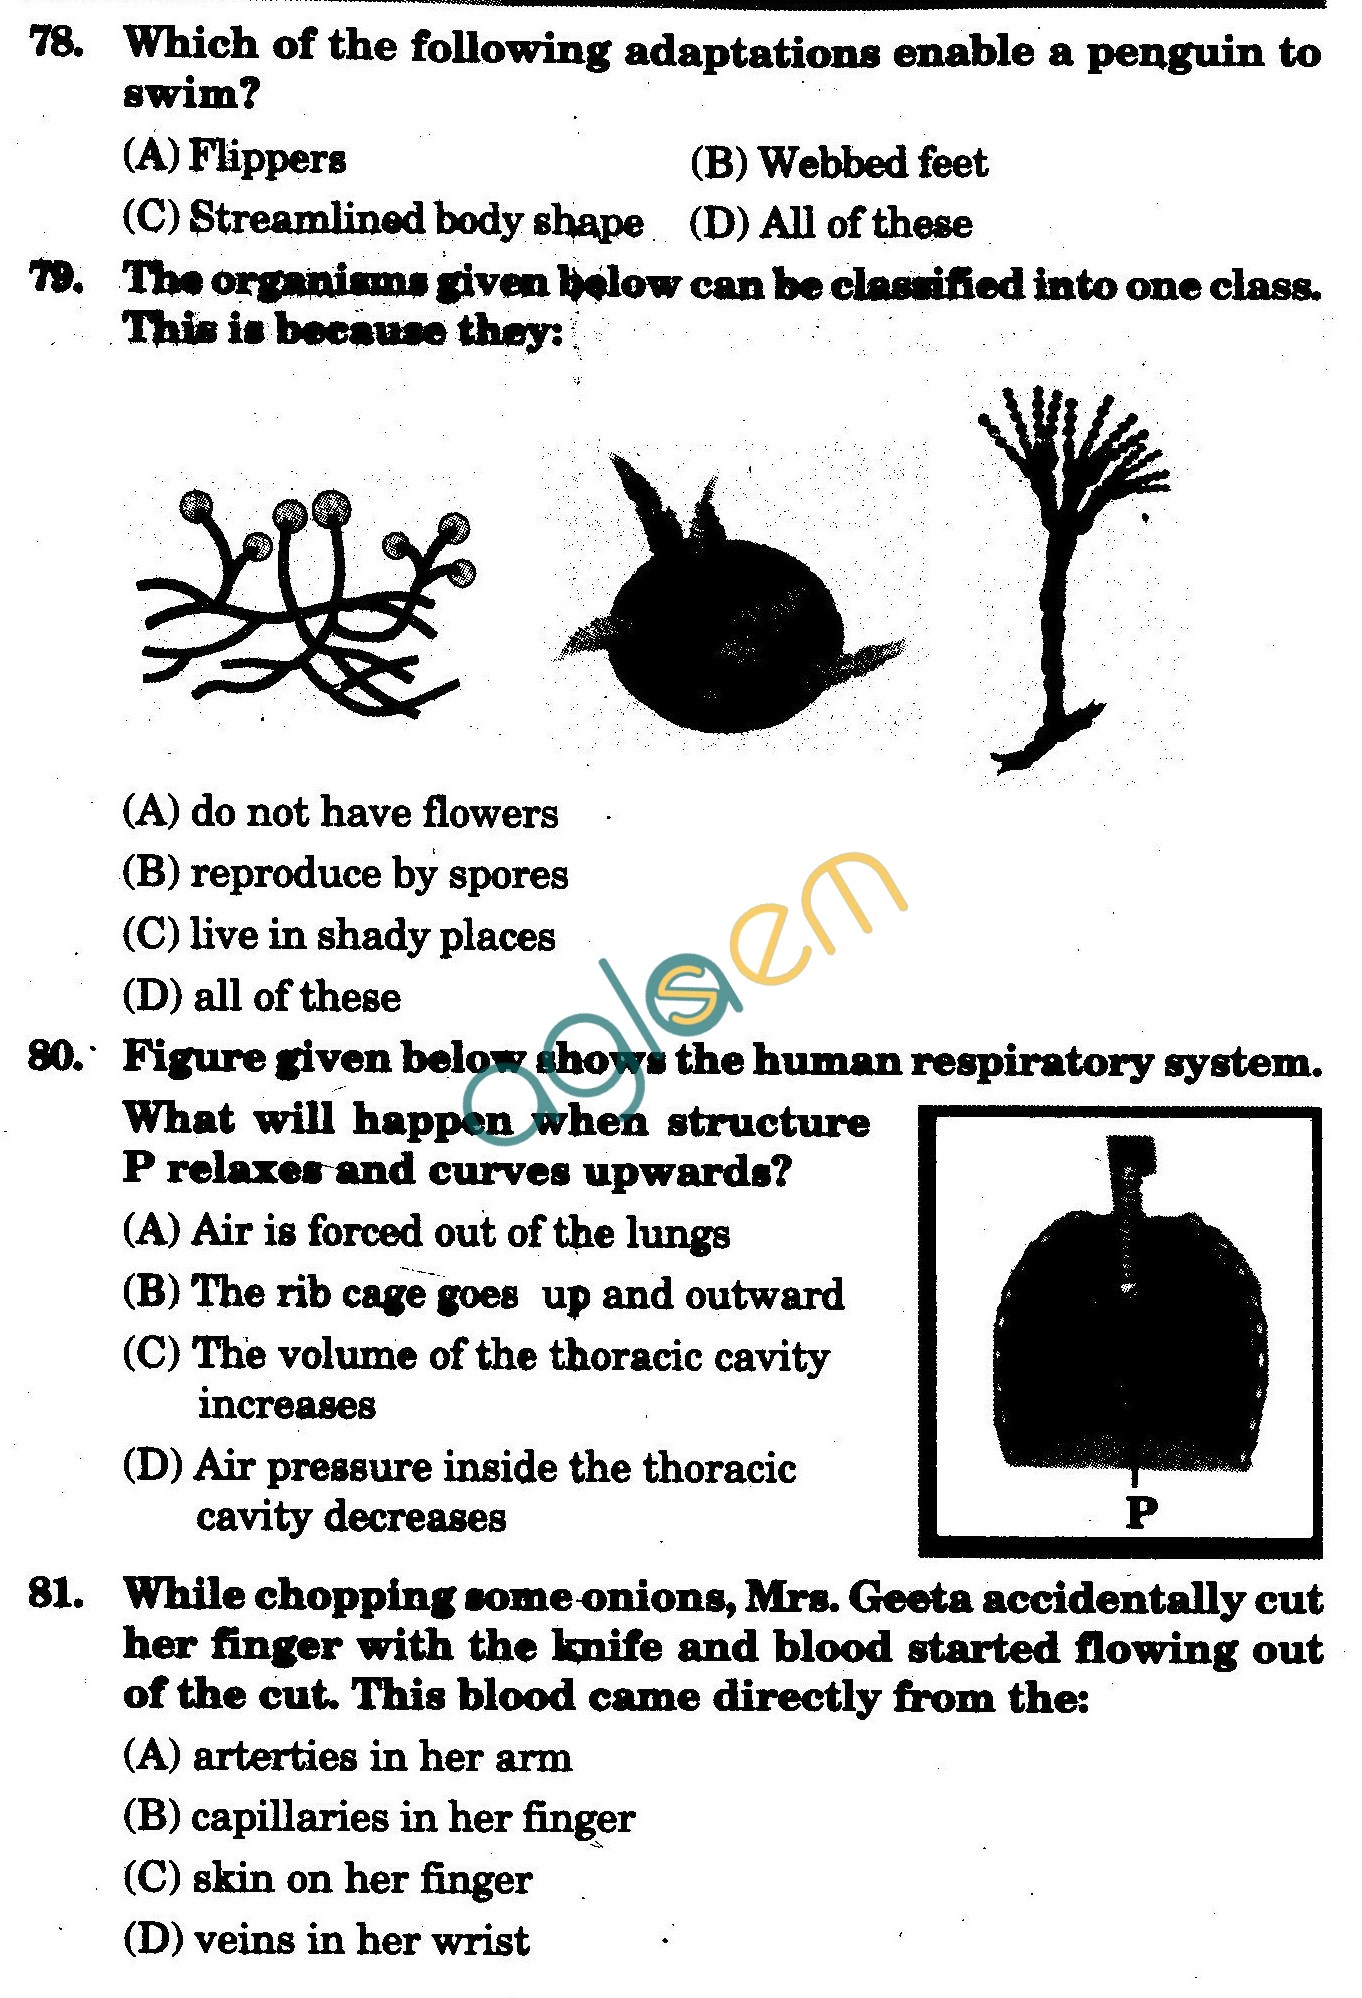 NSTSE 2009 Class VII Question Paper with Answers - Biology